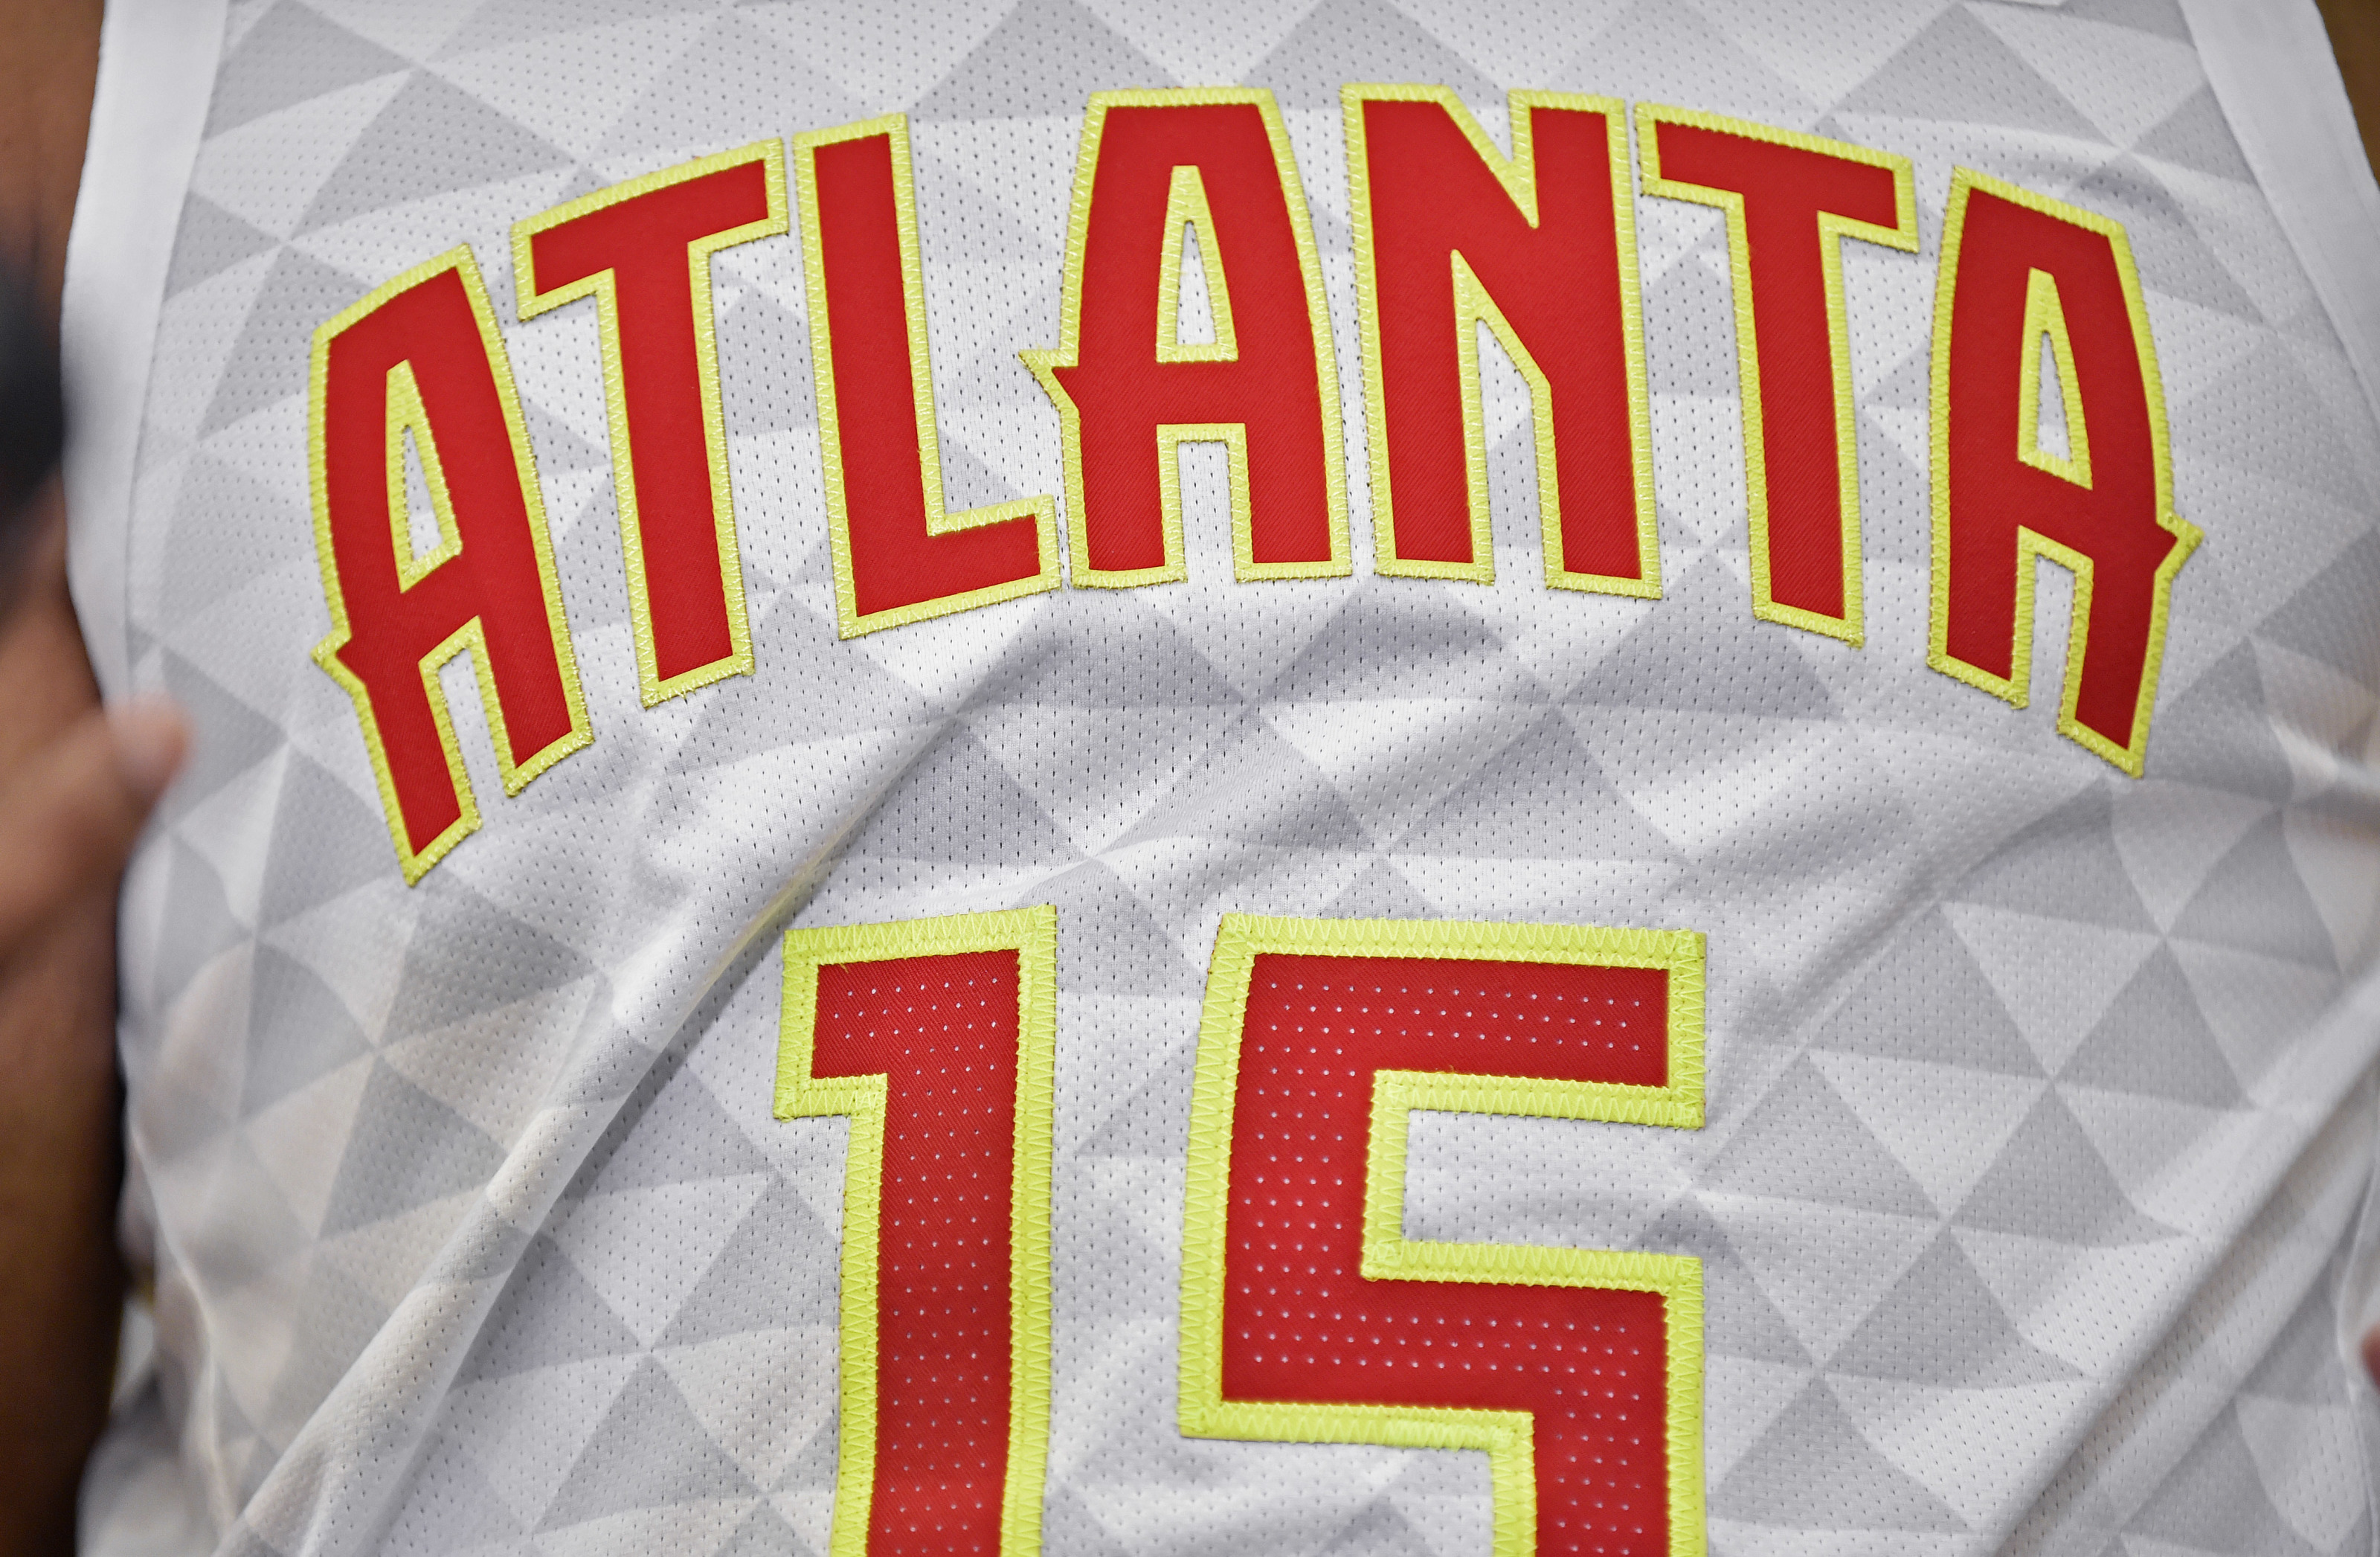 How To Make The Atlanta Hawks 2018 Peachtree Jersey and Court